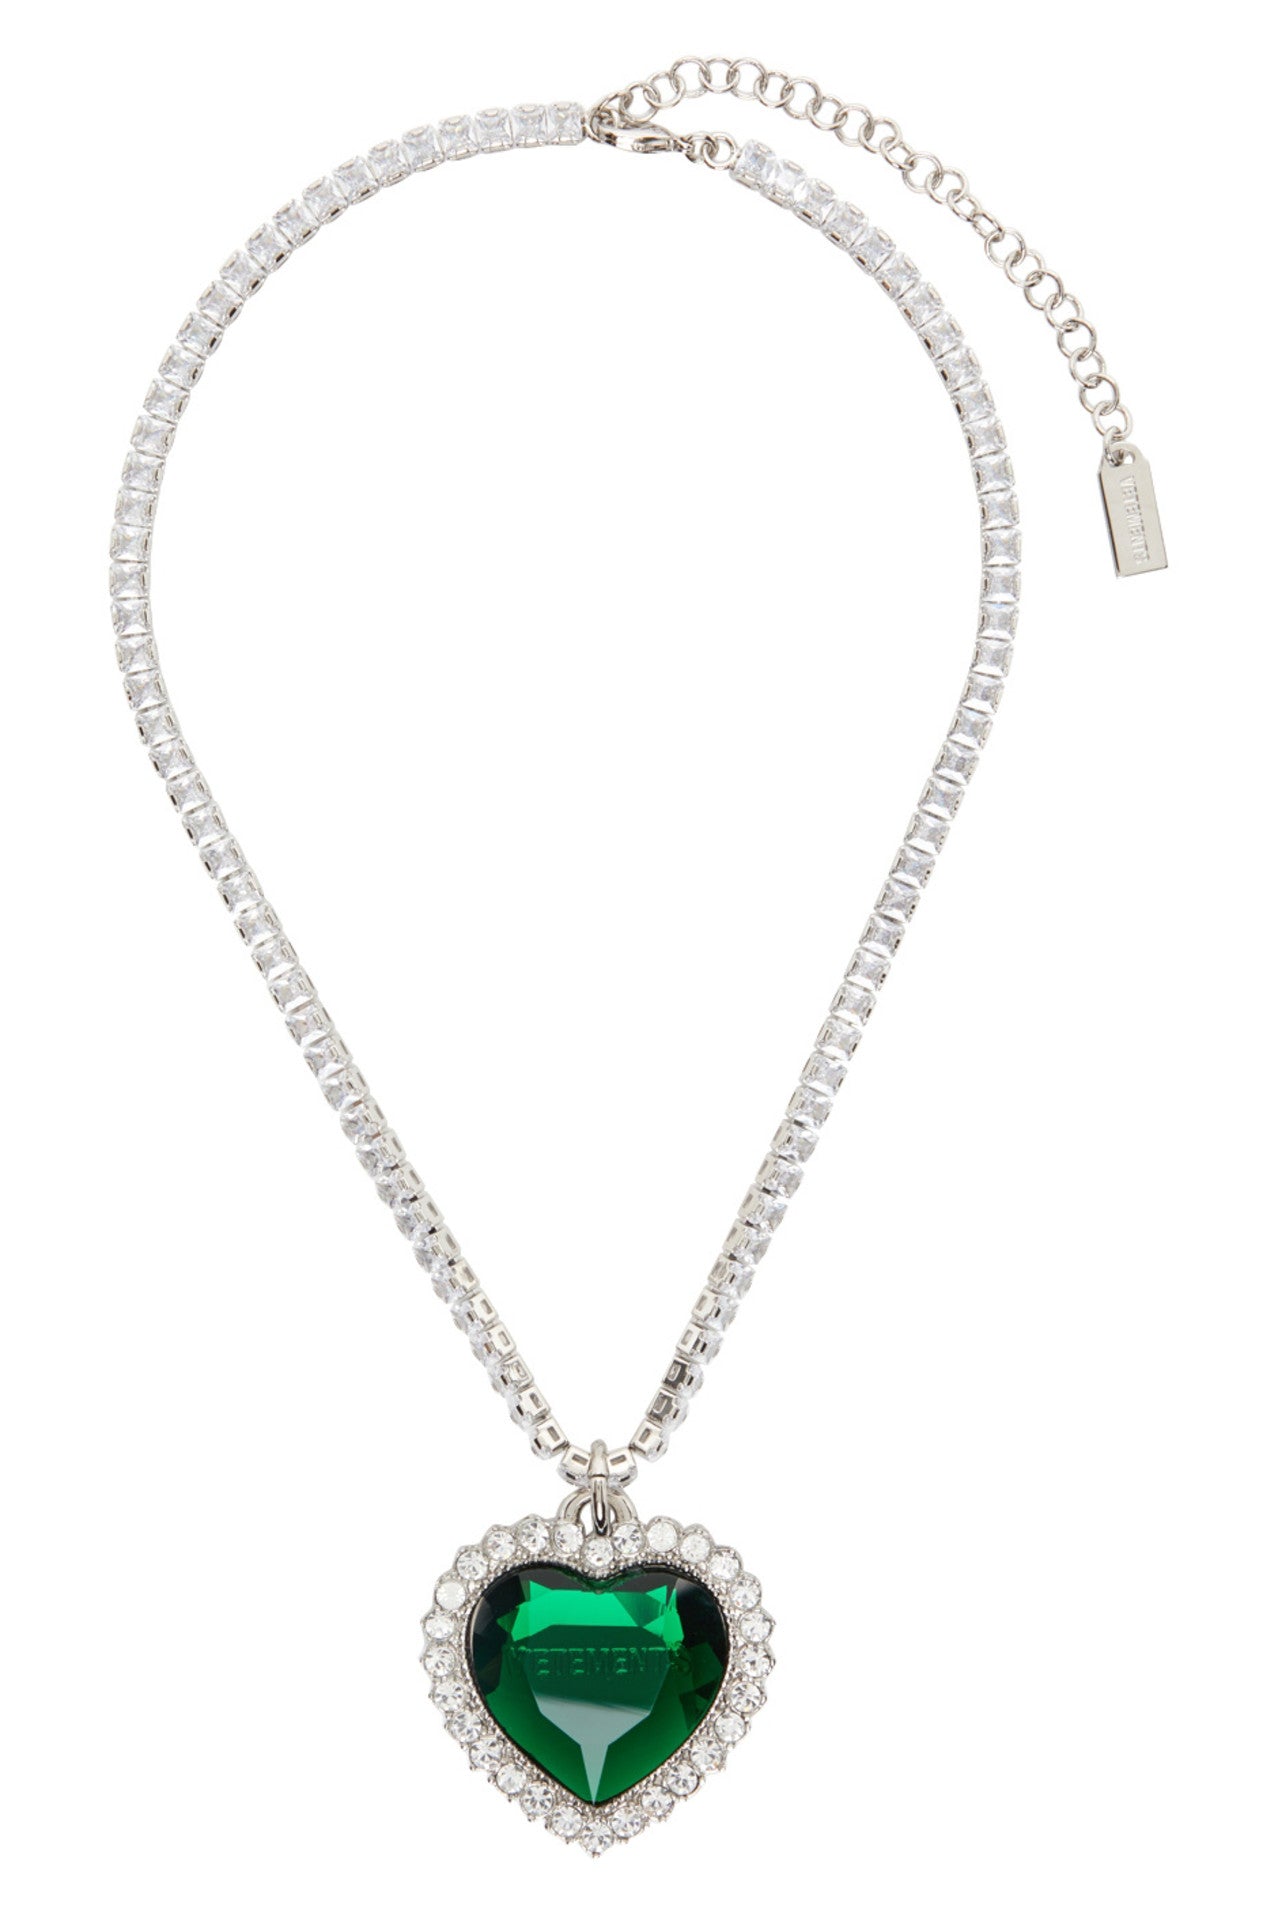 Silver & Green Crystal Heart Necklace